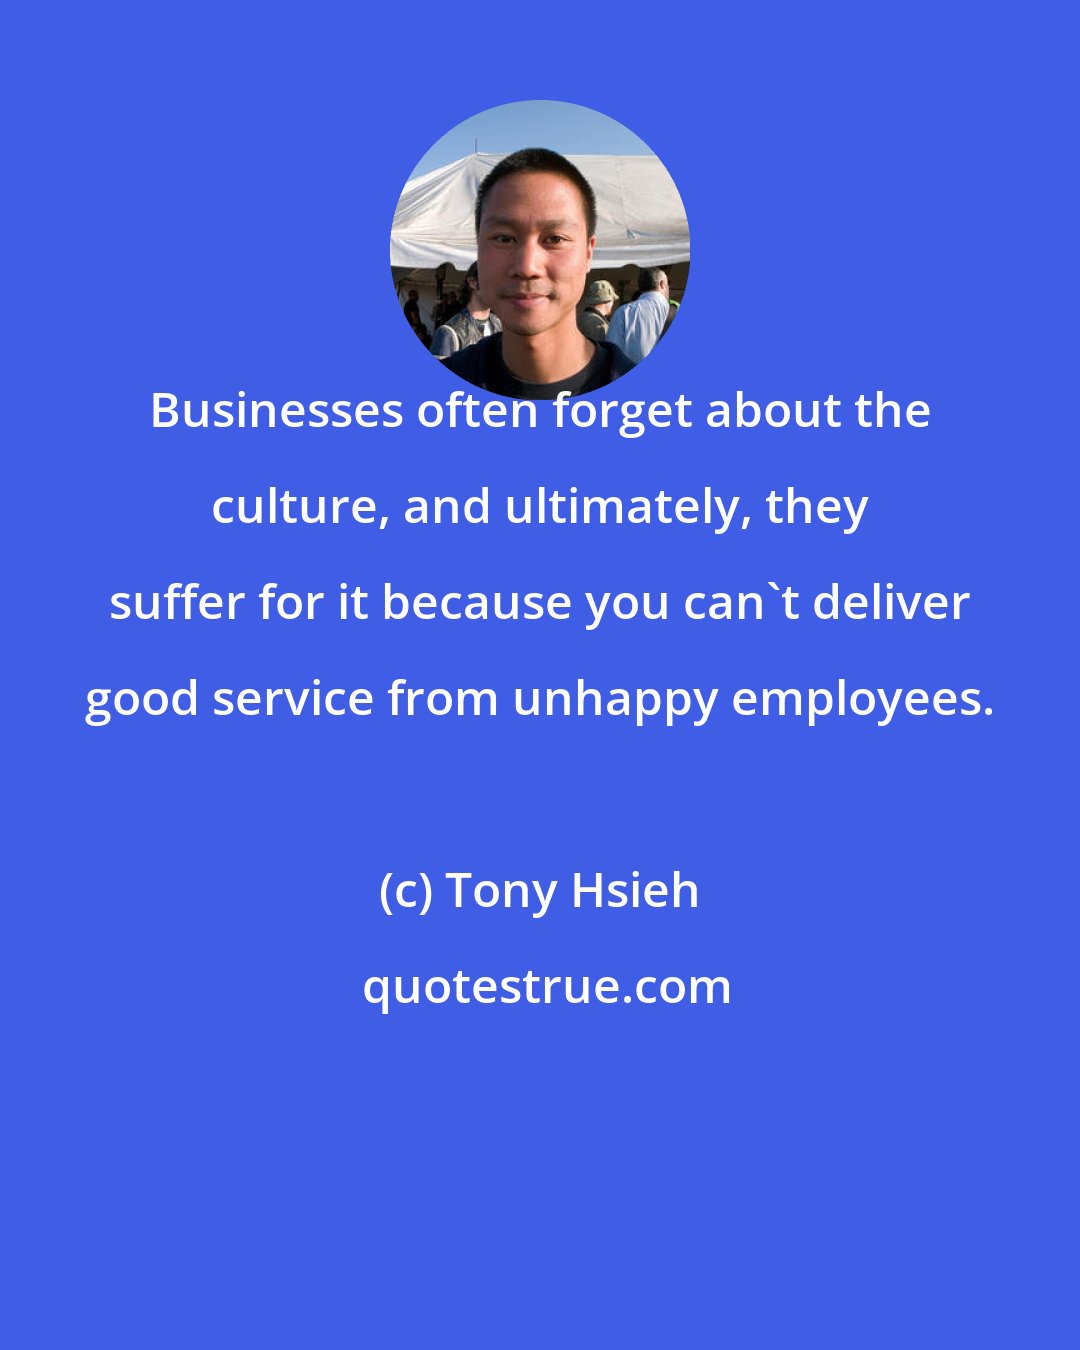 Tony Hsieh: Businesses often forget about the culture, and ultimately, they suffer for it because you can't deliver good service from unhappy employees.